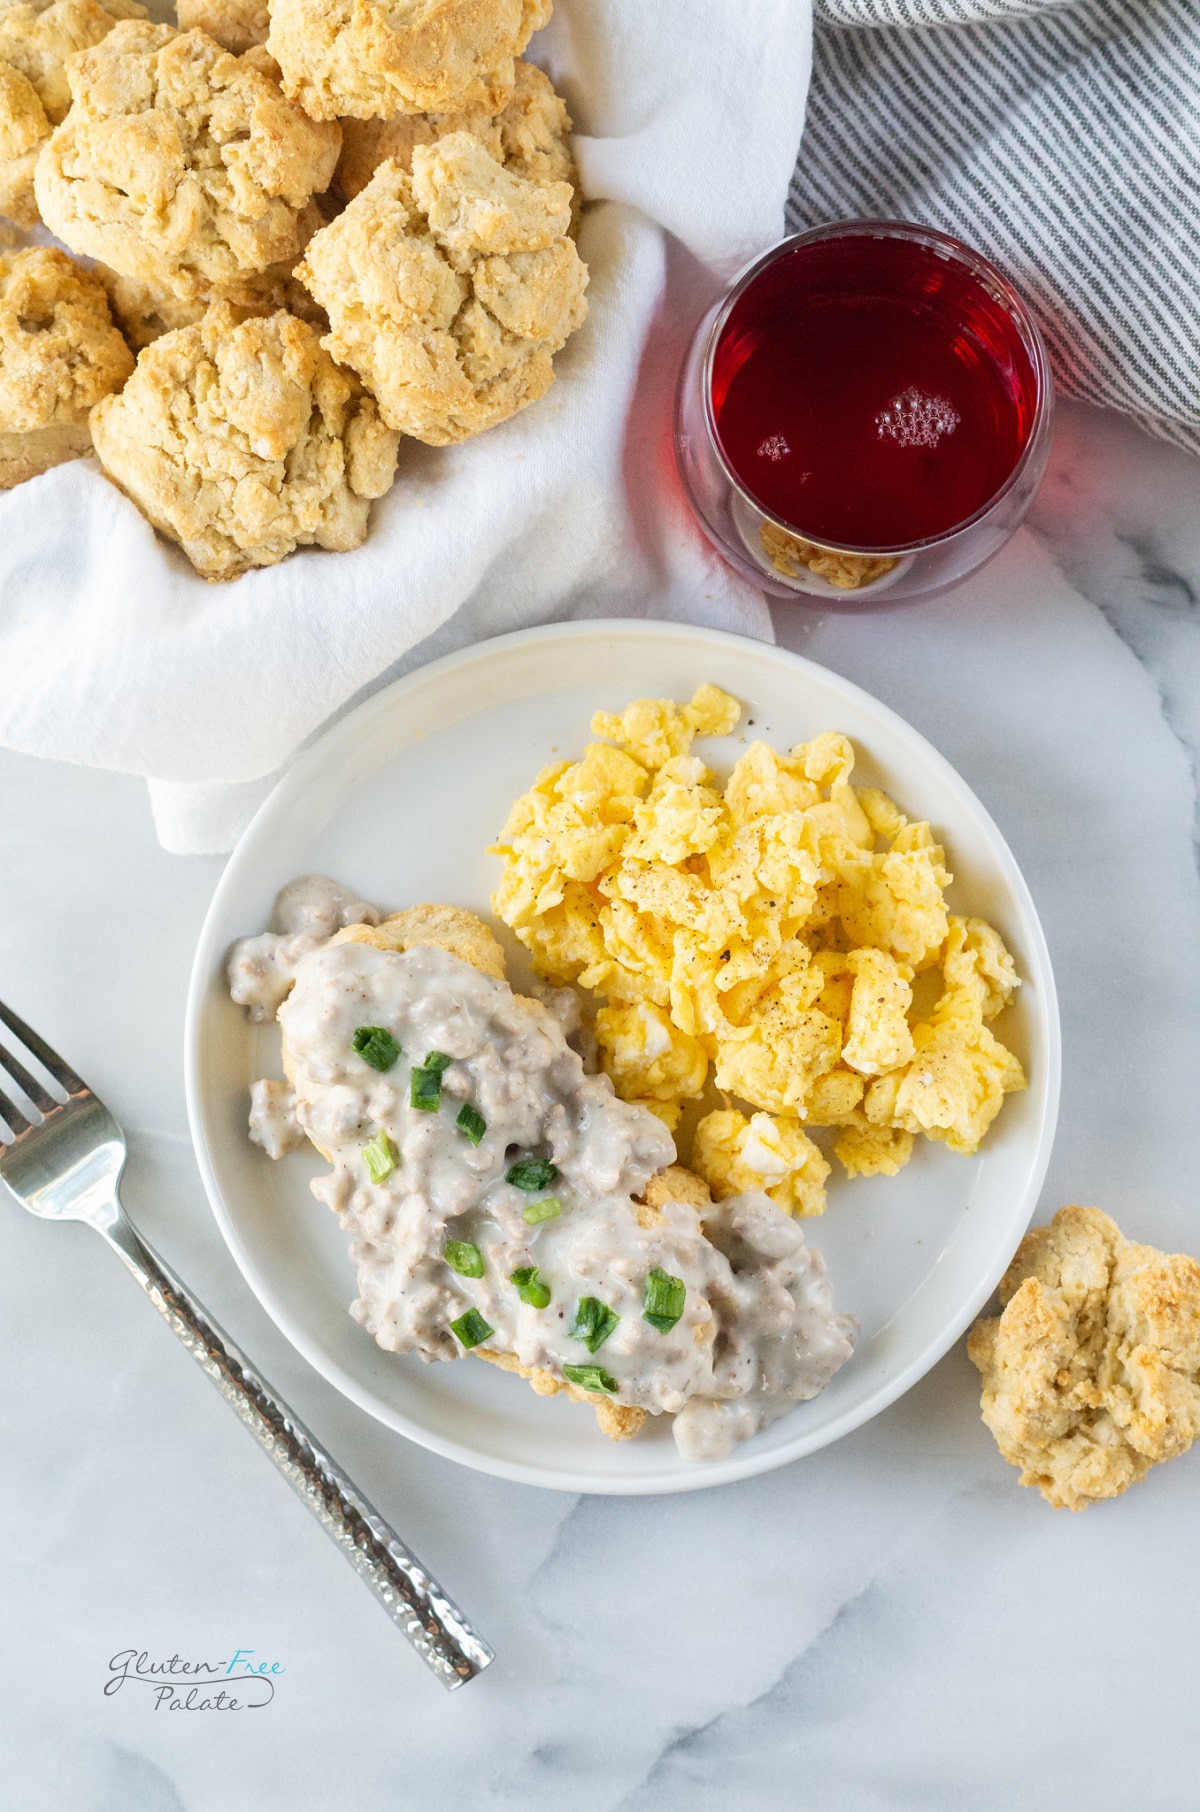 a breakfast plate of scrambled eggs, biscuits topped with gravy. A silver fork is on the left, a basket of fresh gluten free biscuits and a glass of cranberry juice is above the plate.